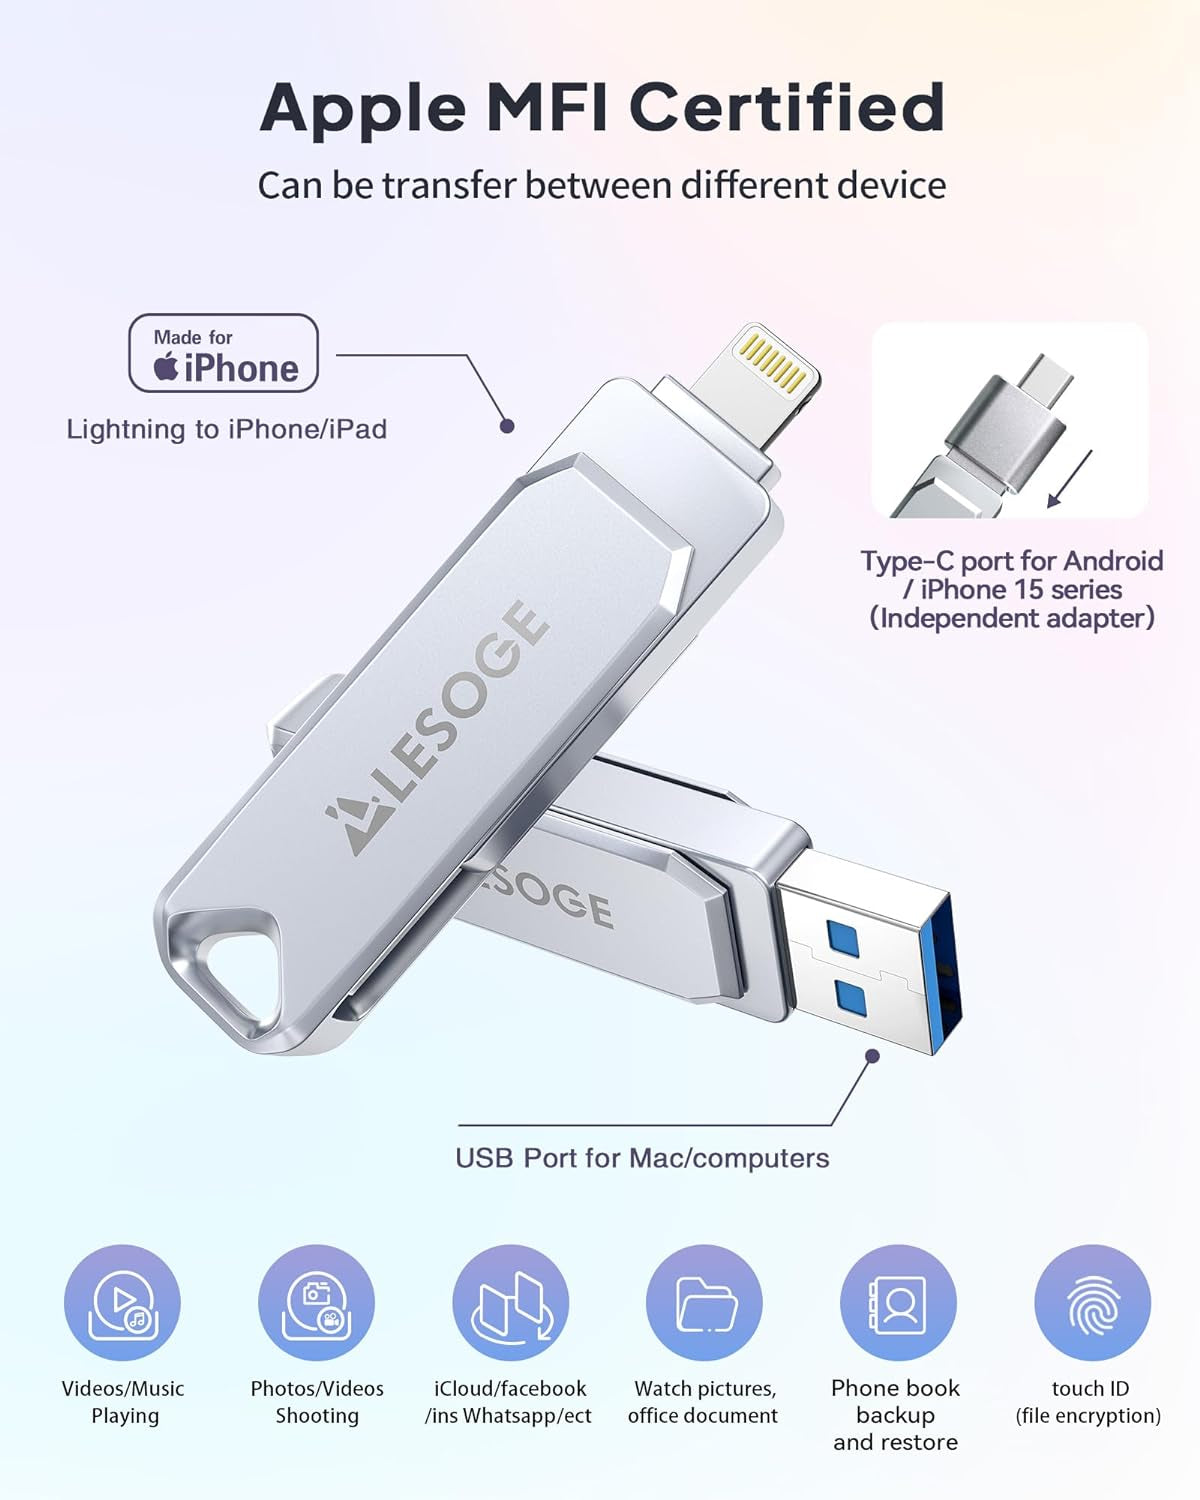 Mfi Certified 128GB Flash Drive for Iphone Photo Stick USB Memory Stick Thumb Drives, High Speed USB Stick External Storage for Iphone/Ipad/Android/Pc